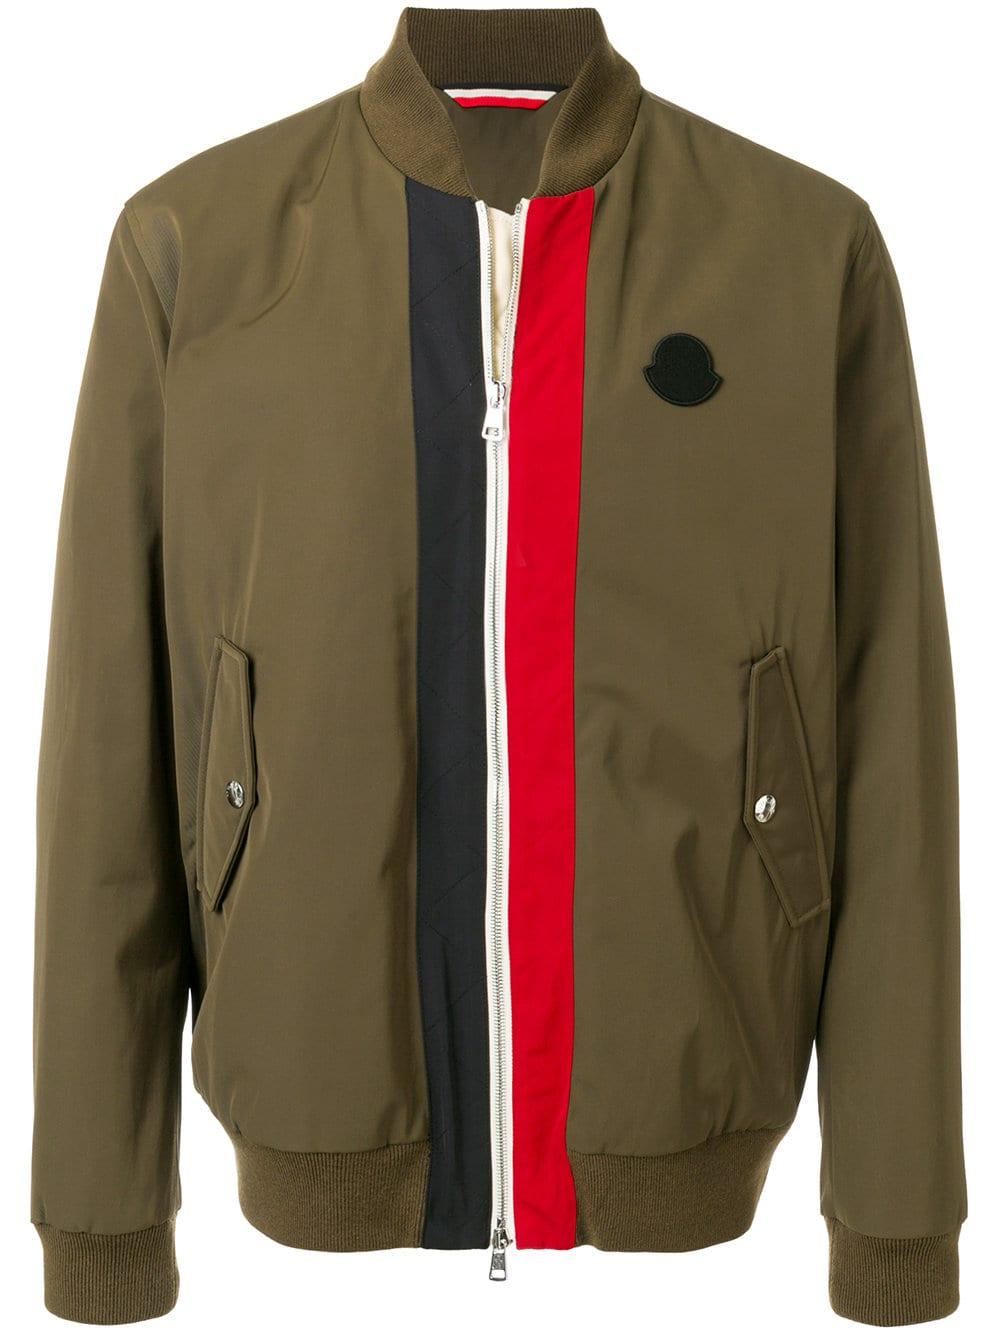 Moncler Cotton Tacna Giubbotto Bomber Jacket in Green for Men - Lyst